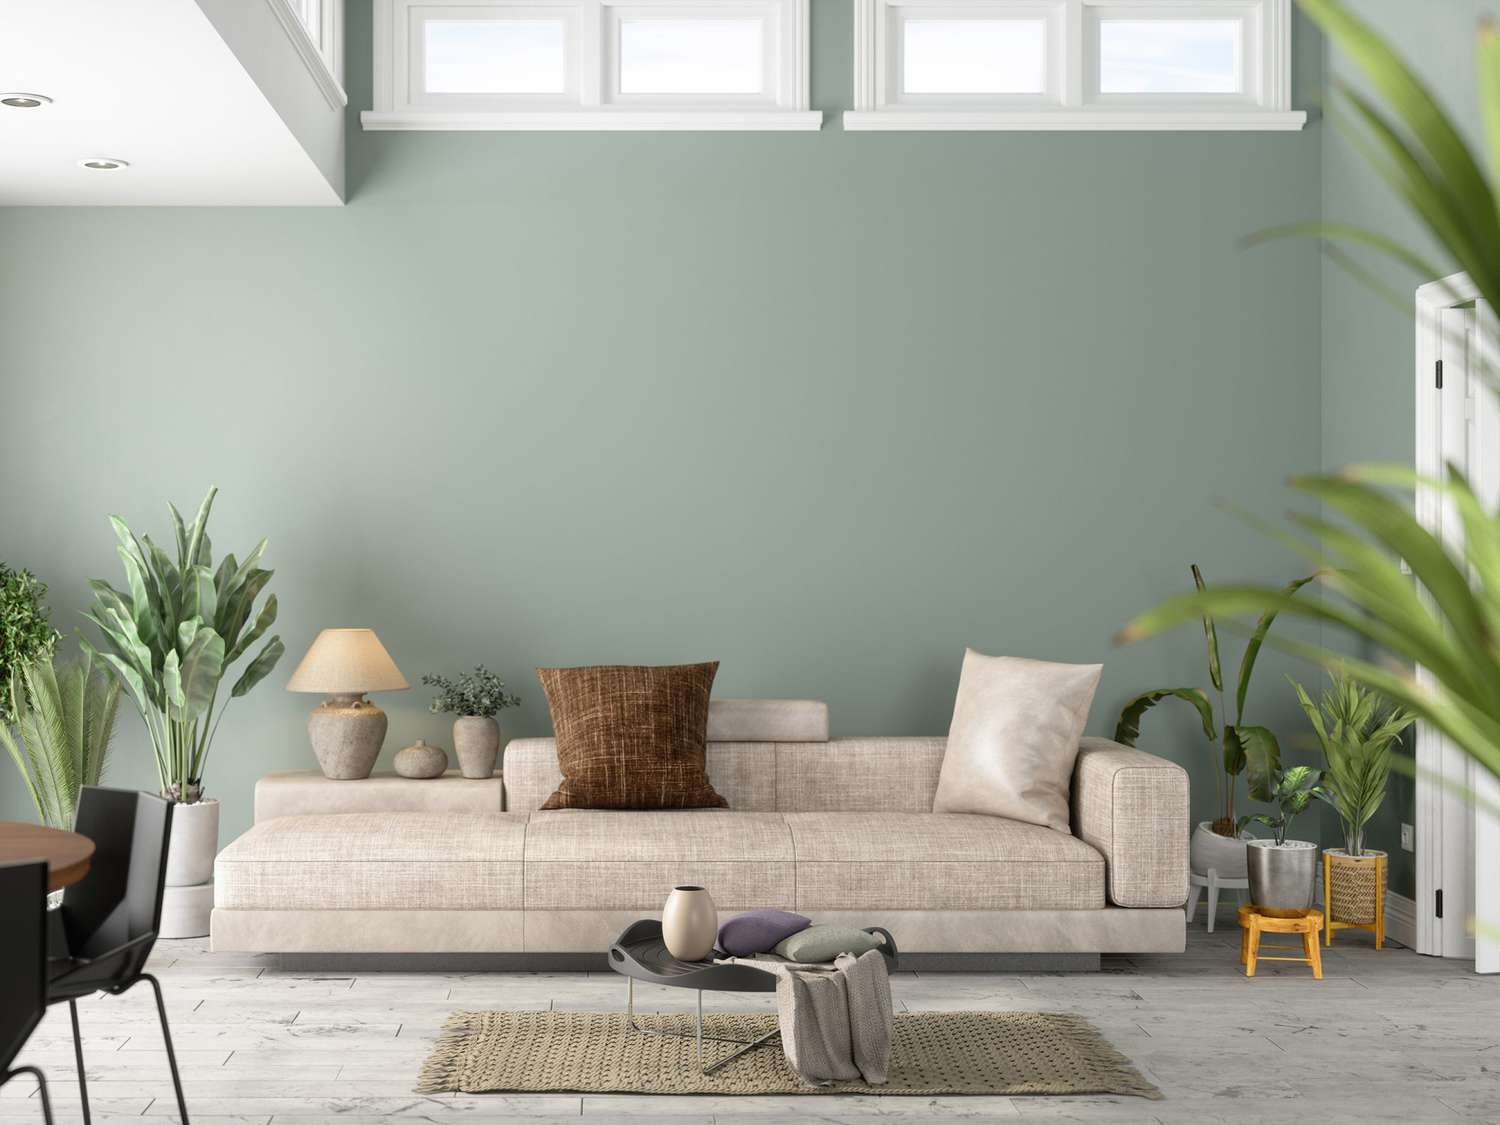 The 12 Best Living Room Paint Colors, According to Design Experts